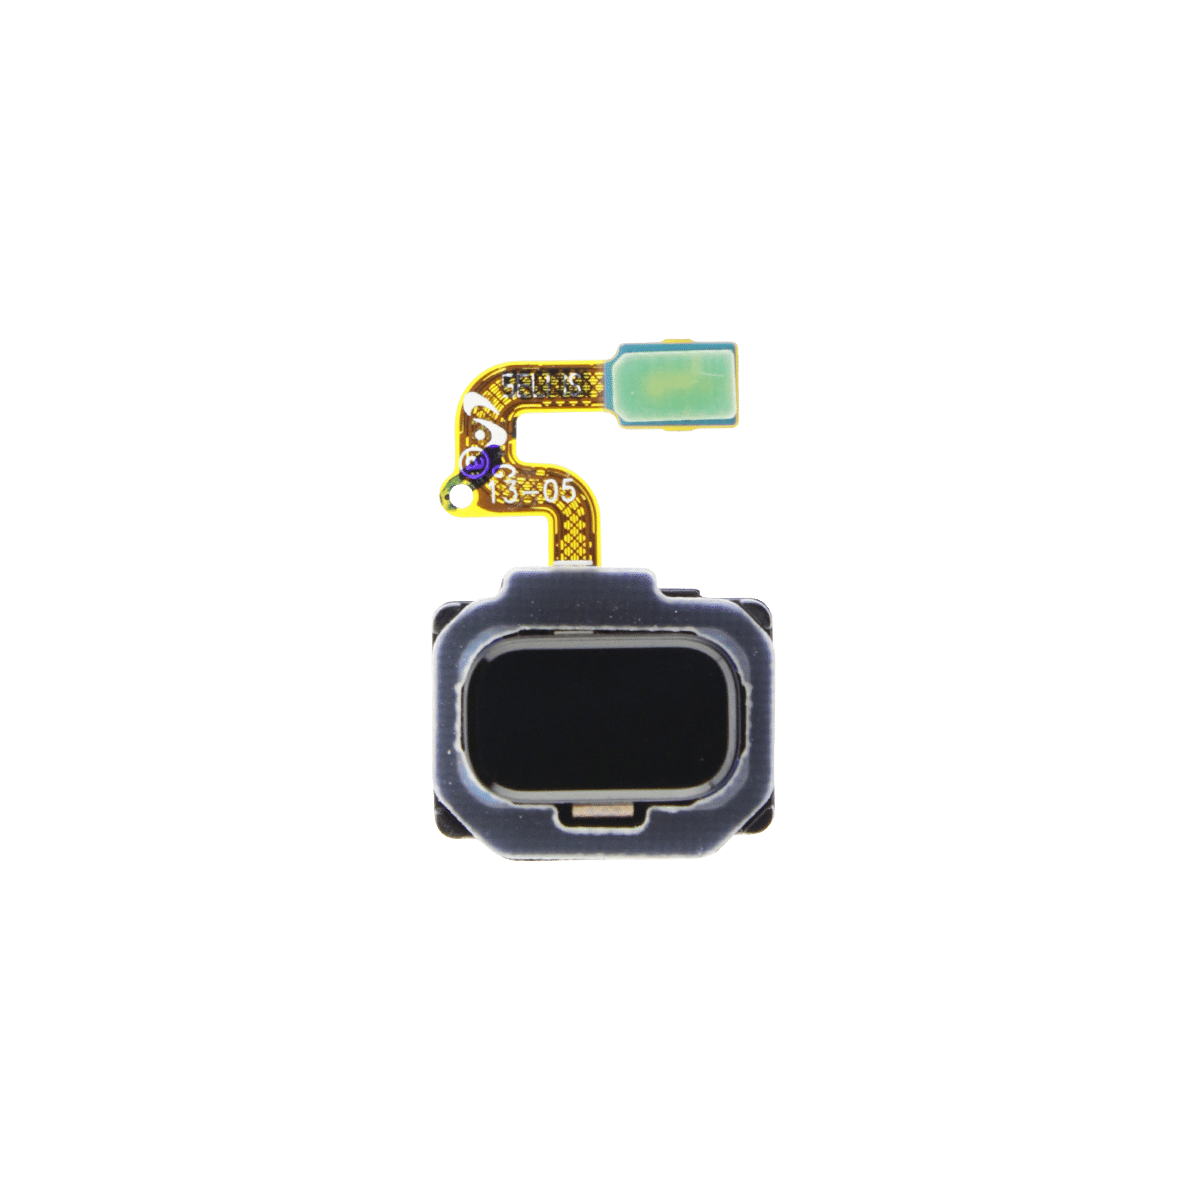 Samsung Galaxy Note 8 Touch ID Flex Cable Replacement